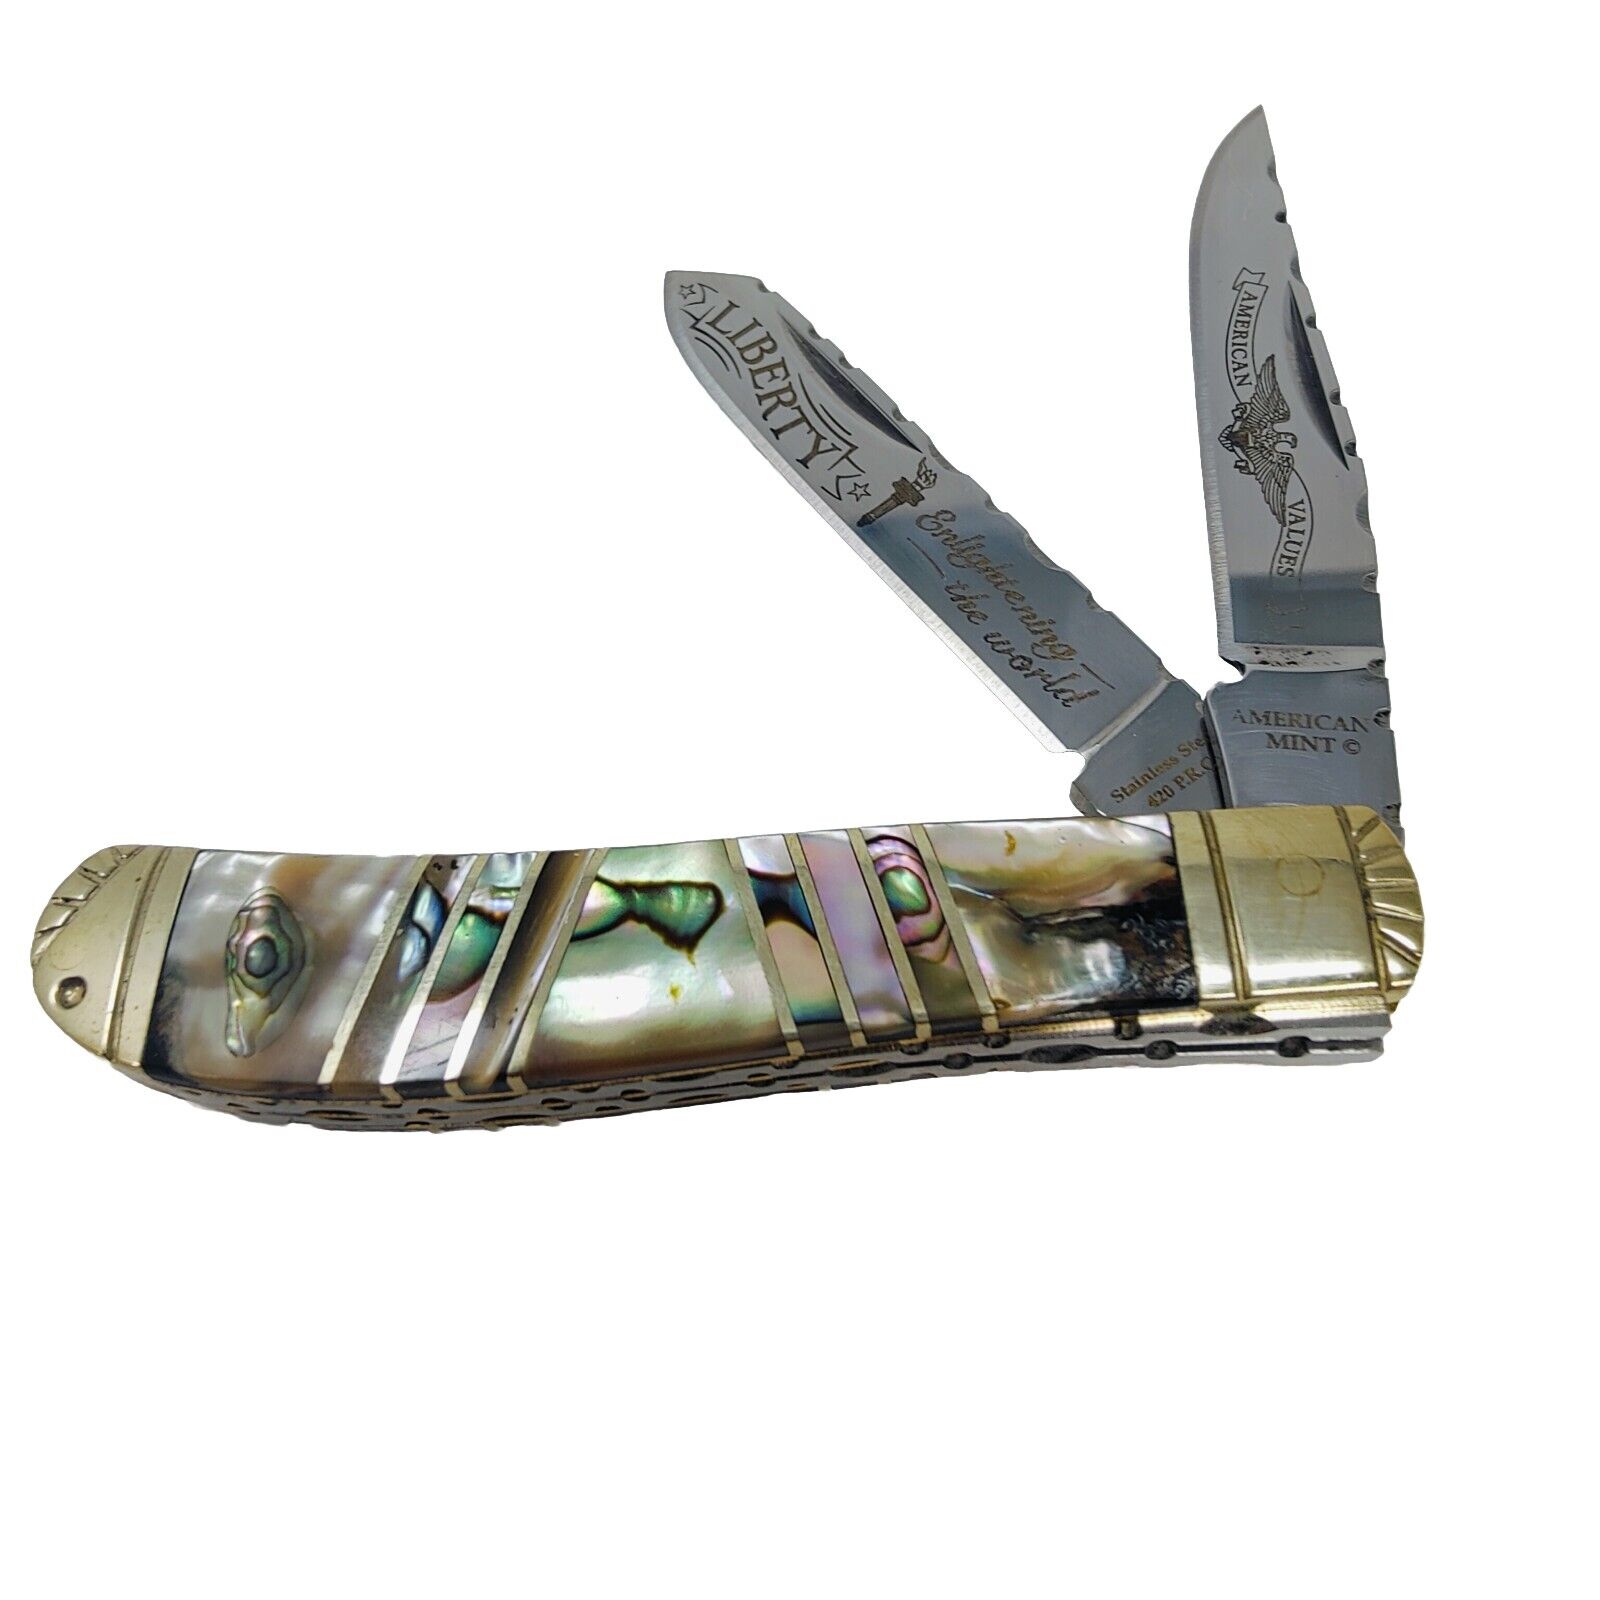 American Mint Liberty Trapper knife inlaid with genuine Abalone.